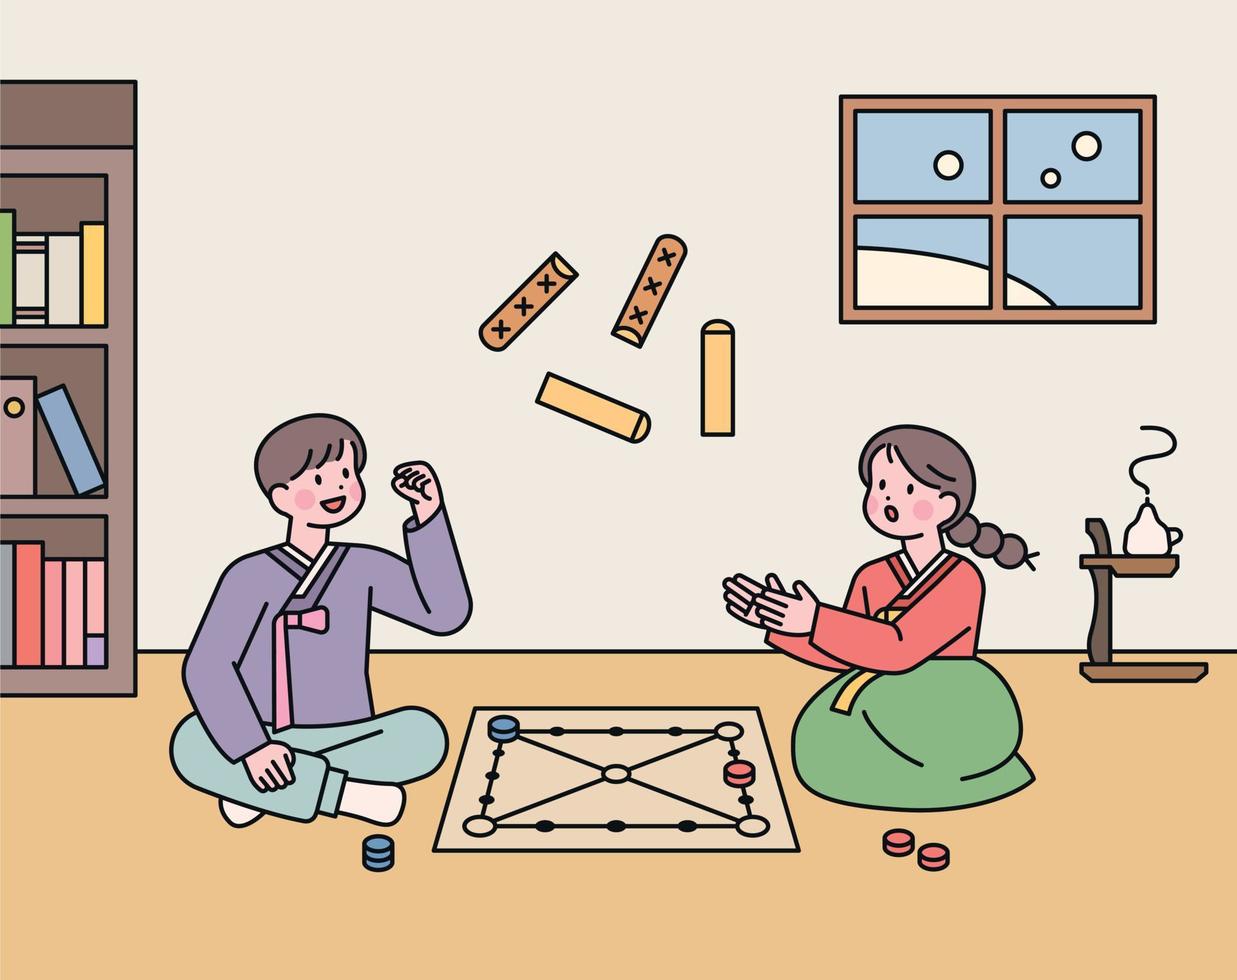 Korean traditional game. Two friends are playing Yut in their room. vector